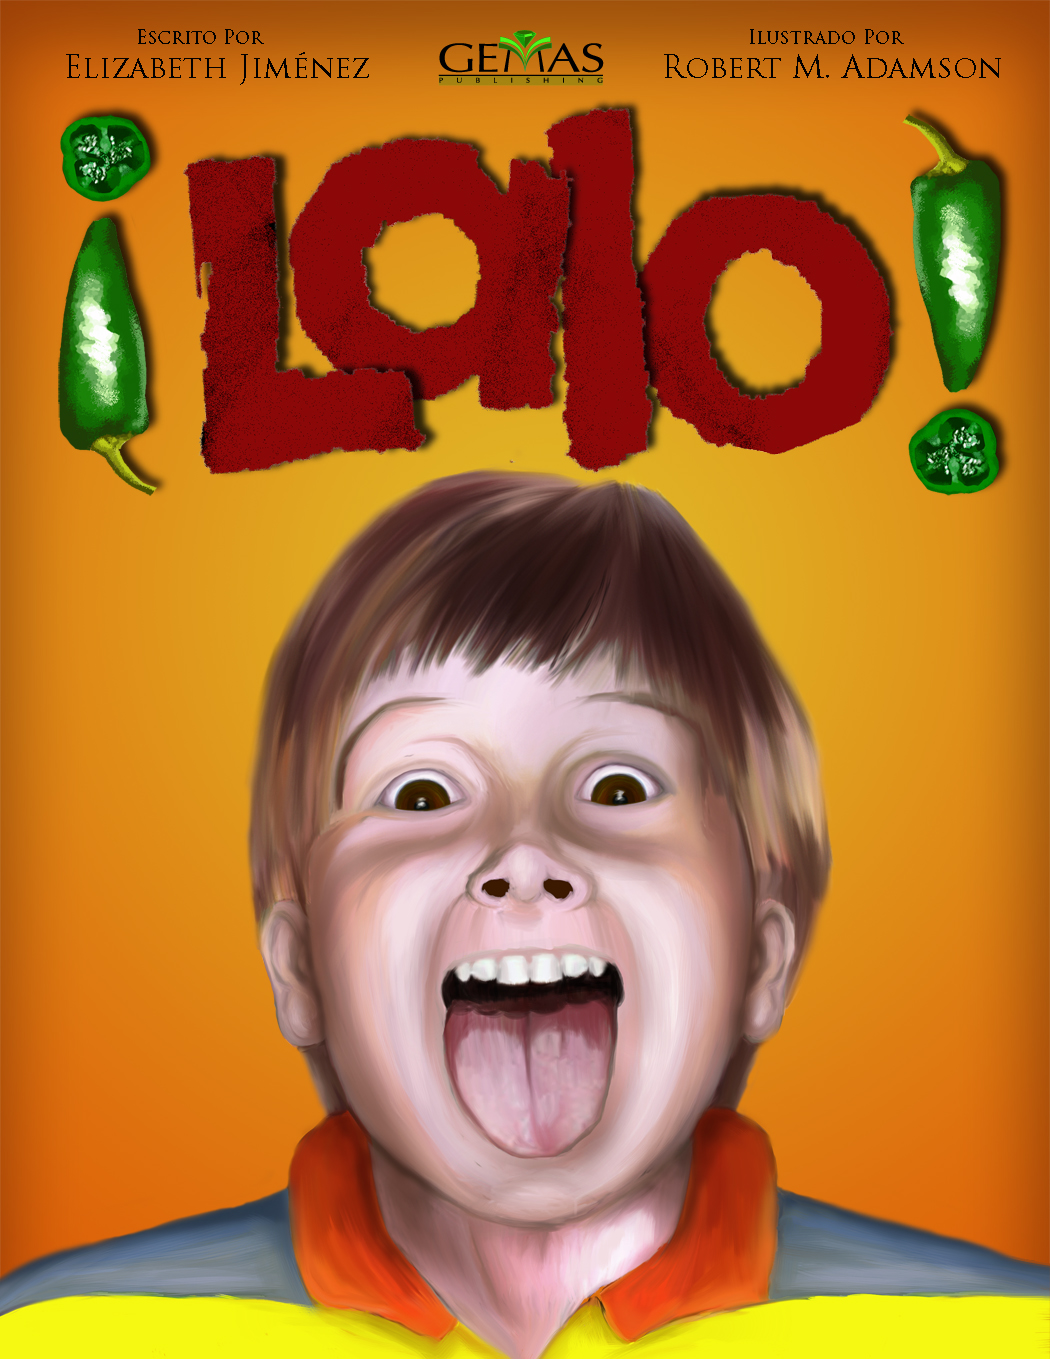 Cover image from the book Lalo.